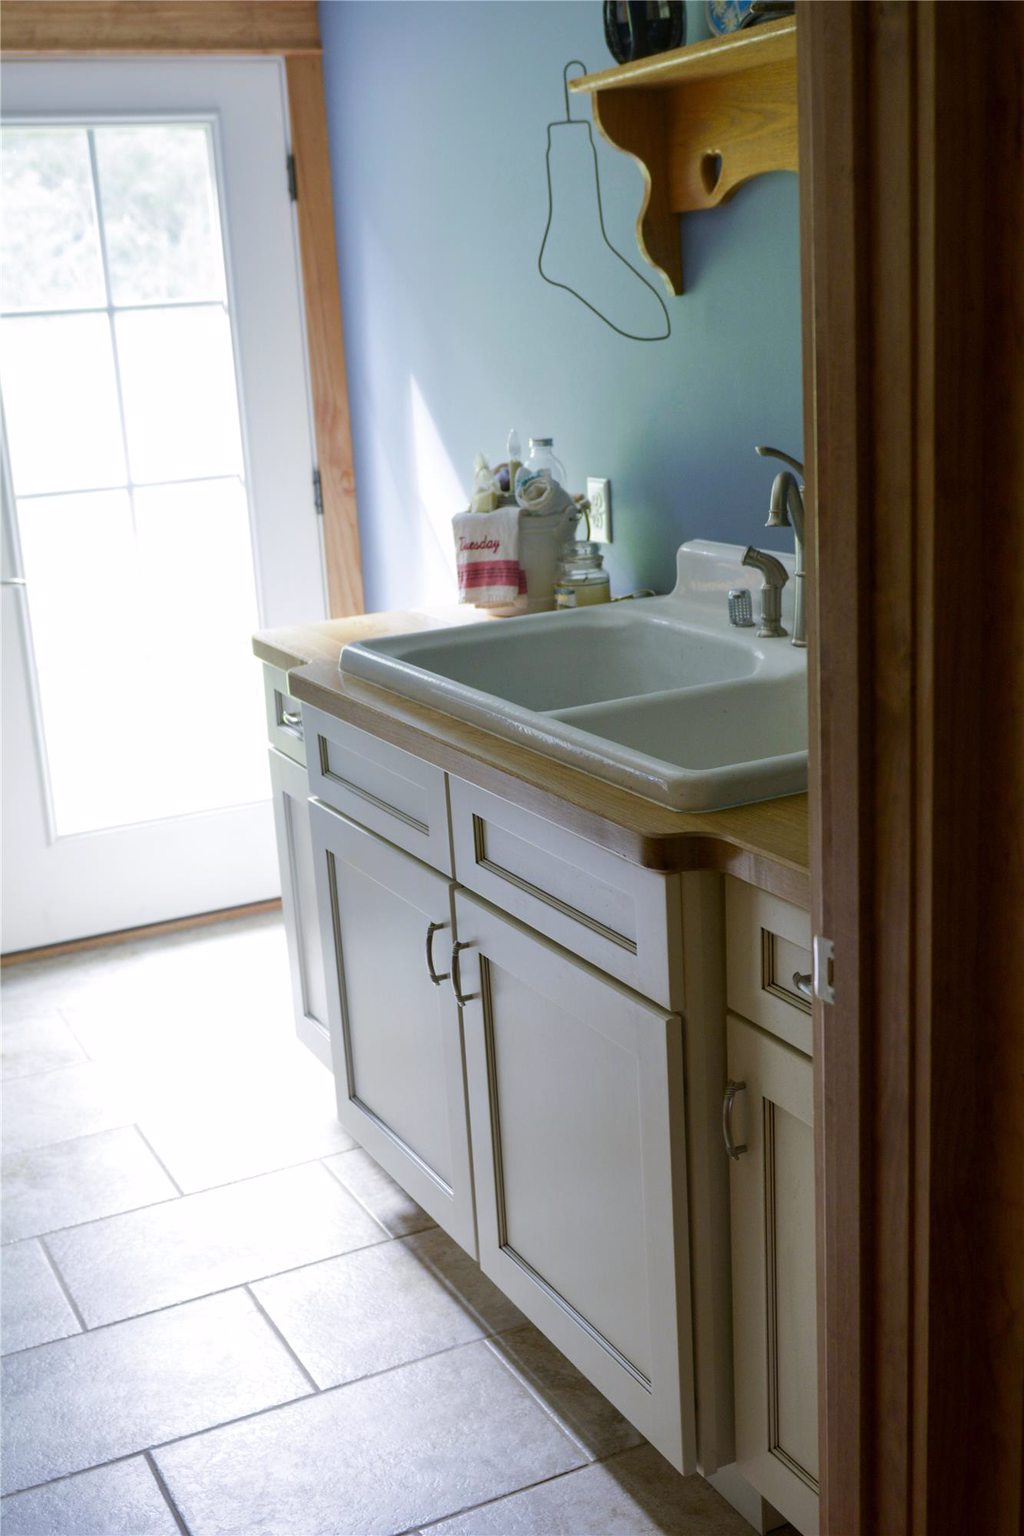 Laundry Room Remodel with Sink and Storage Cabinets on a Tile Floor